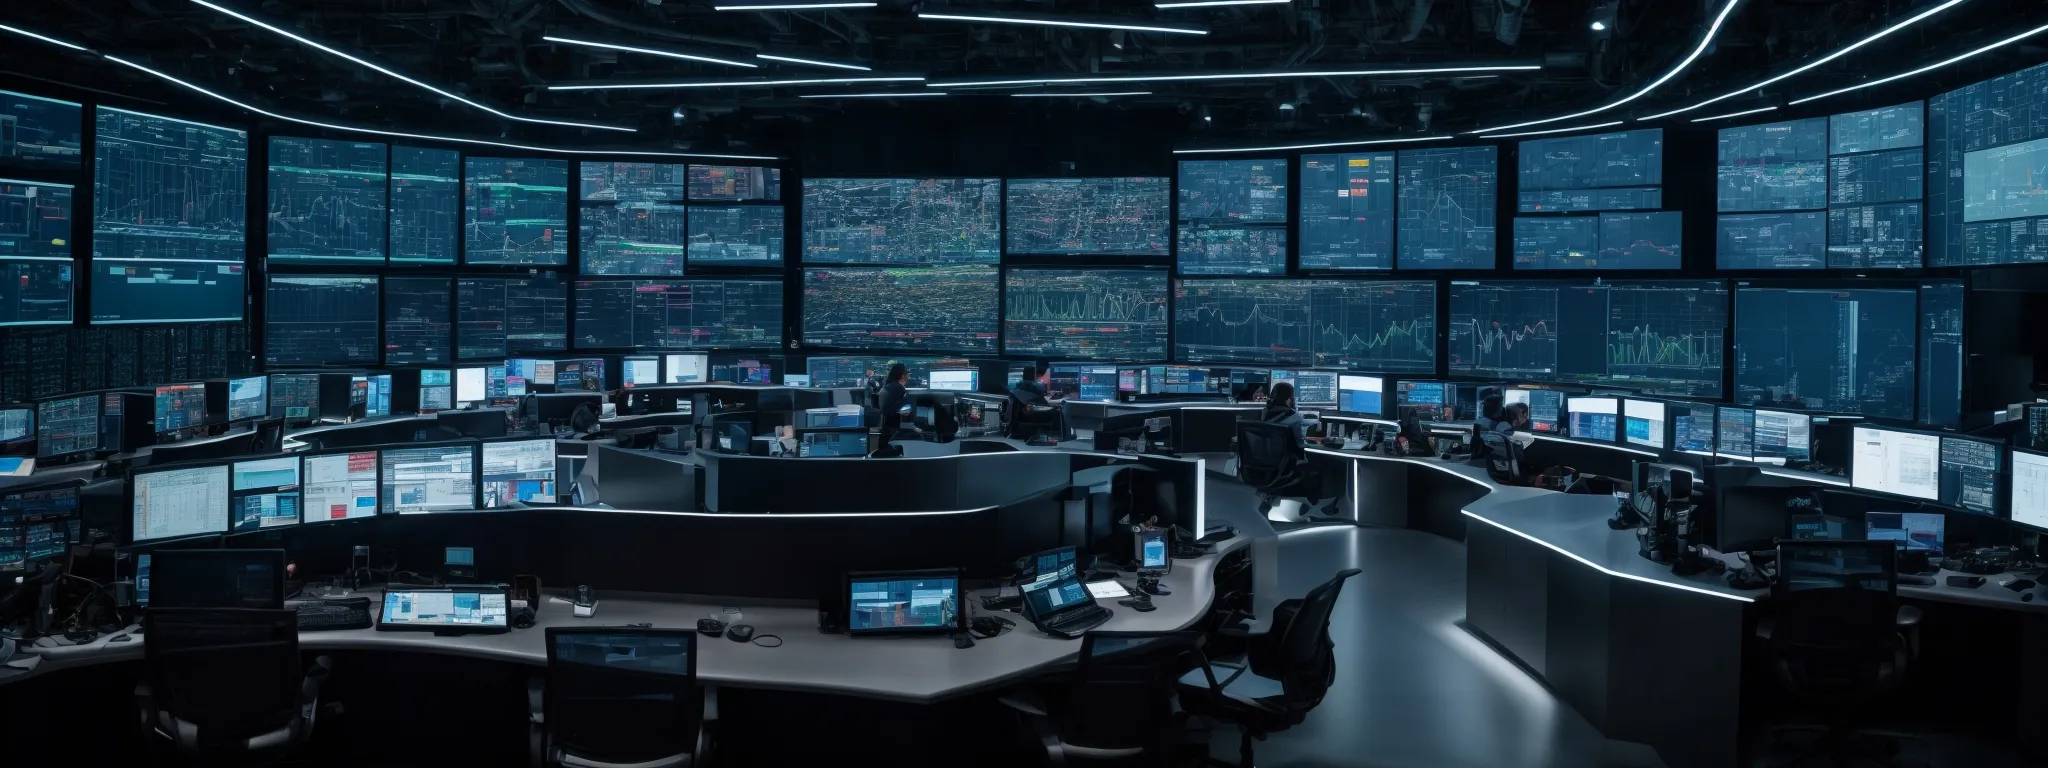 an expansive, high-tech control center with screens displaying data analytics and algorithms, representing the dynamic and evolving world of seo.